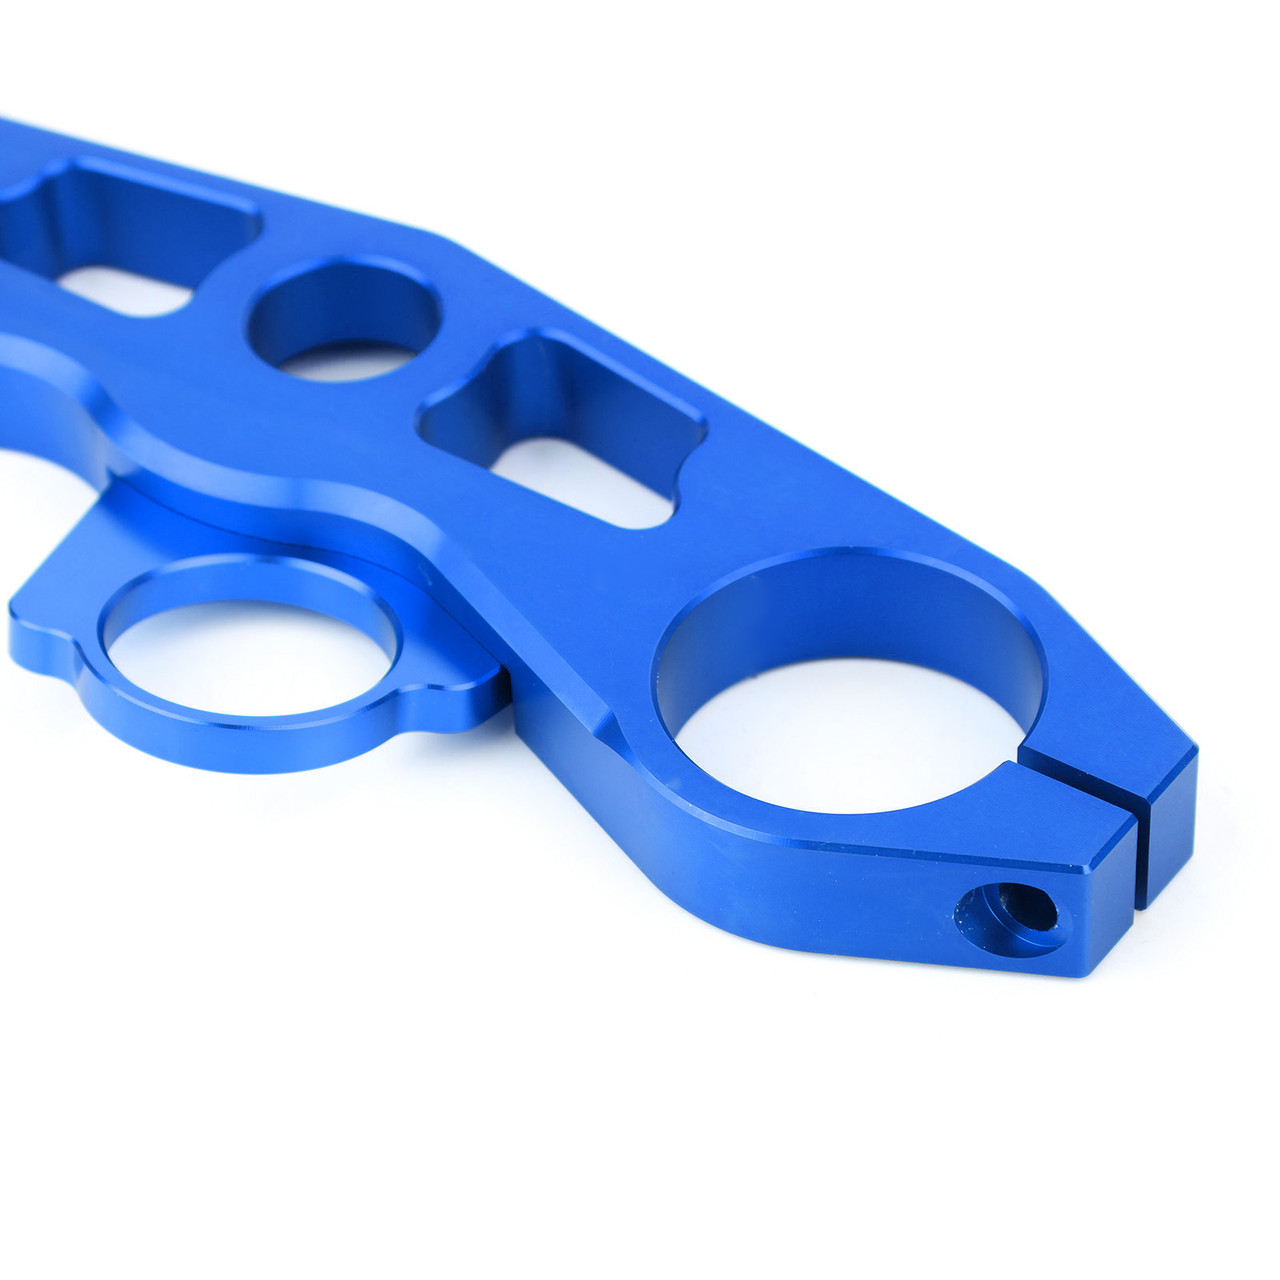 Lowering Triple Tree Front End Upper Top Clamp Fits For Kawasaki Ninja ZX6R 2009-2012 Blue